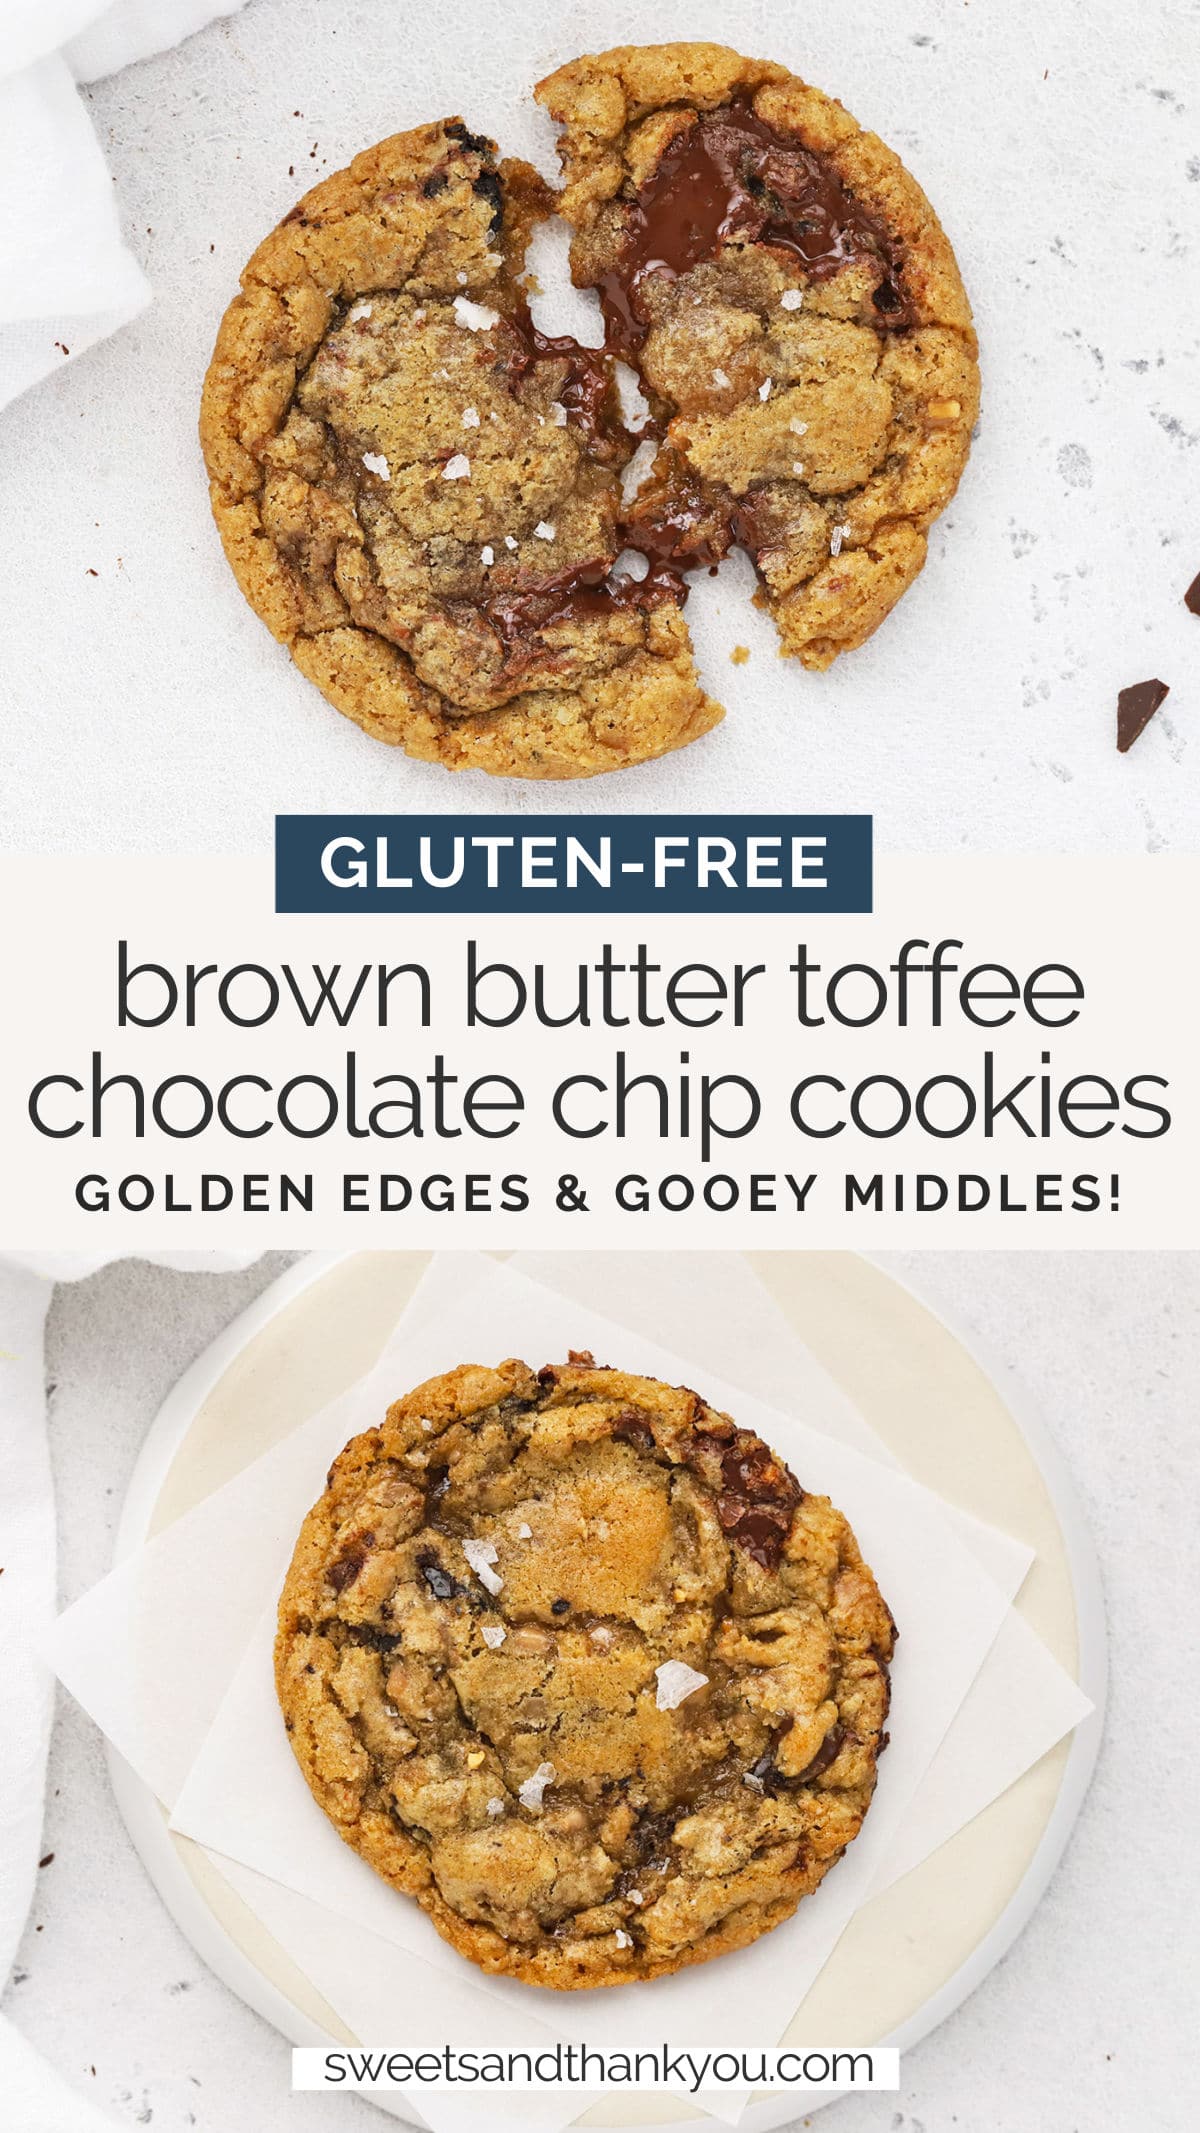 Gluten-Free Brown Butter Toffee Chocolate Chip Cookies - These gluten-free chocolate chip cookies are what dreams are made of. Studded with caramel-y toffee bits and plenty of melty chocolate, they're golden on the outside and gooey on the inside. Yum! // Brown Butter Chocolate Chip Cookies // Gluten-Free Cookie Recipe // Gluten-Free Browned Butter Chocolate Chip Cookies // Toffee Chocolate Chip Cookies #cookies #glutenfree #chocolatechip #brownbutter